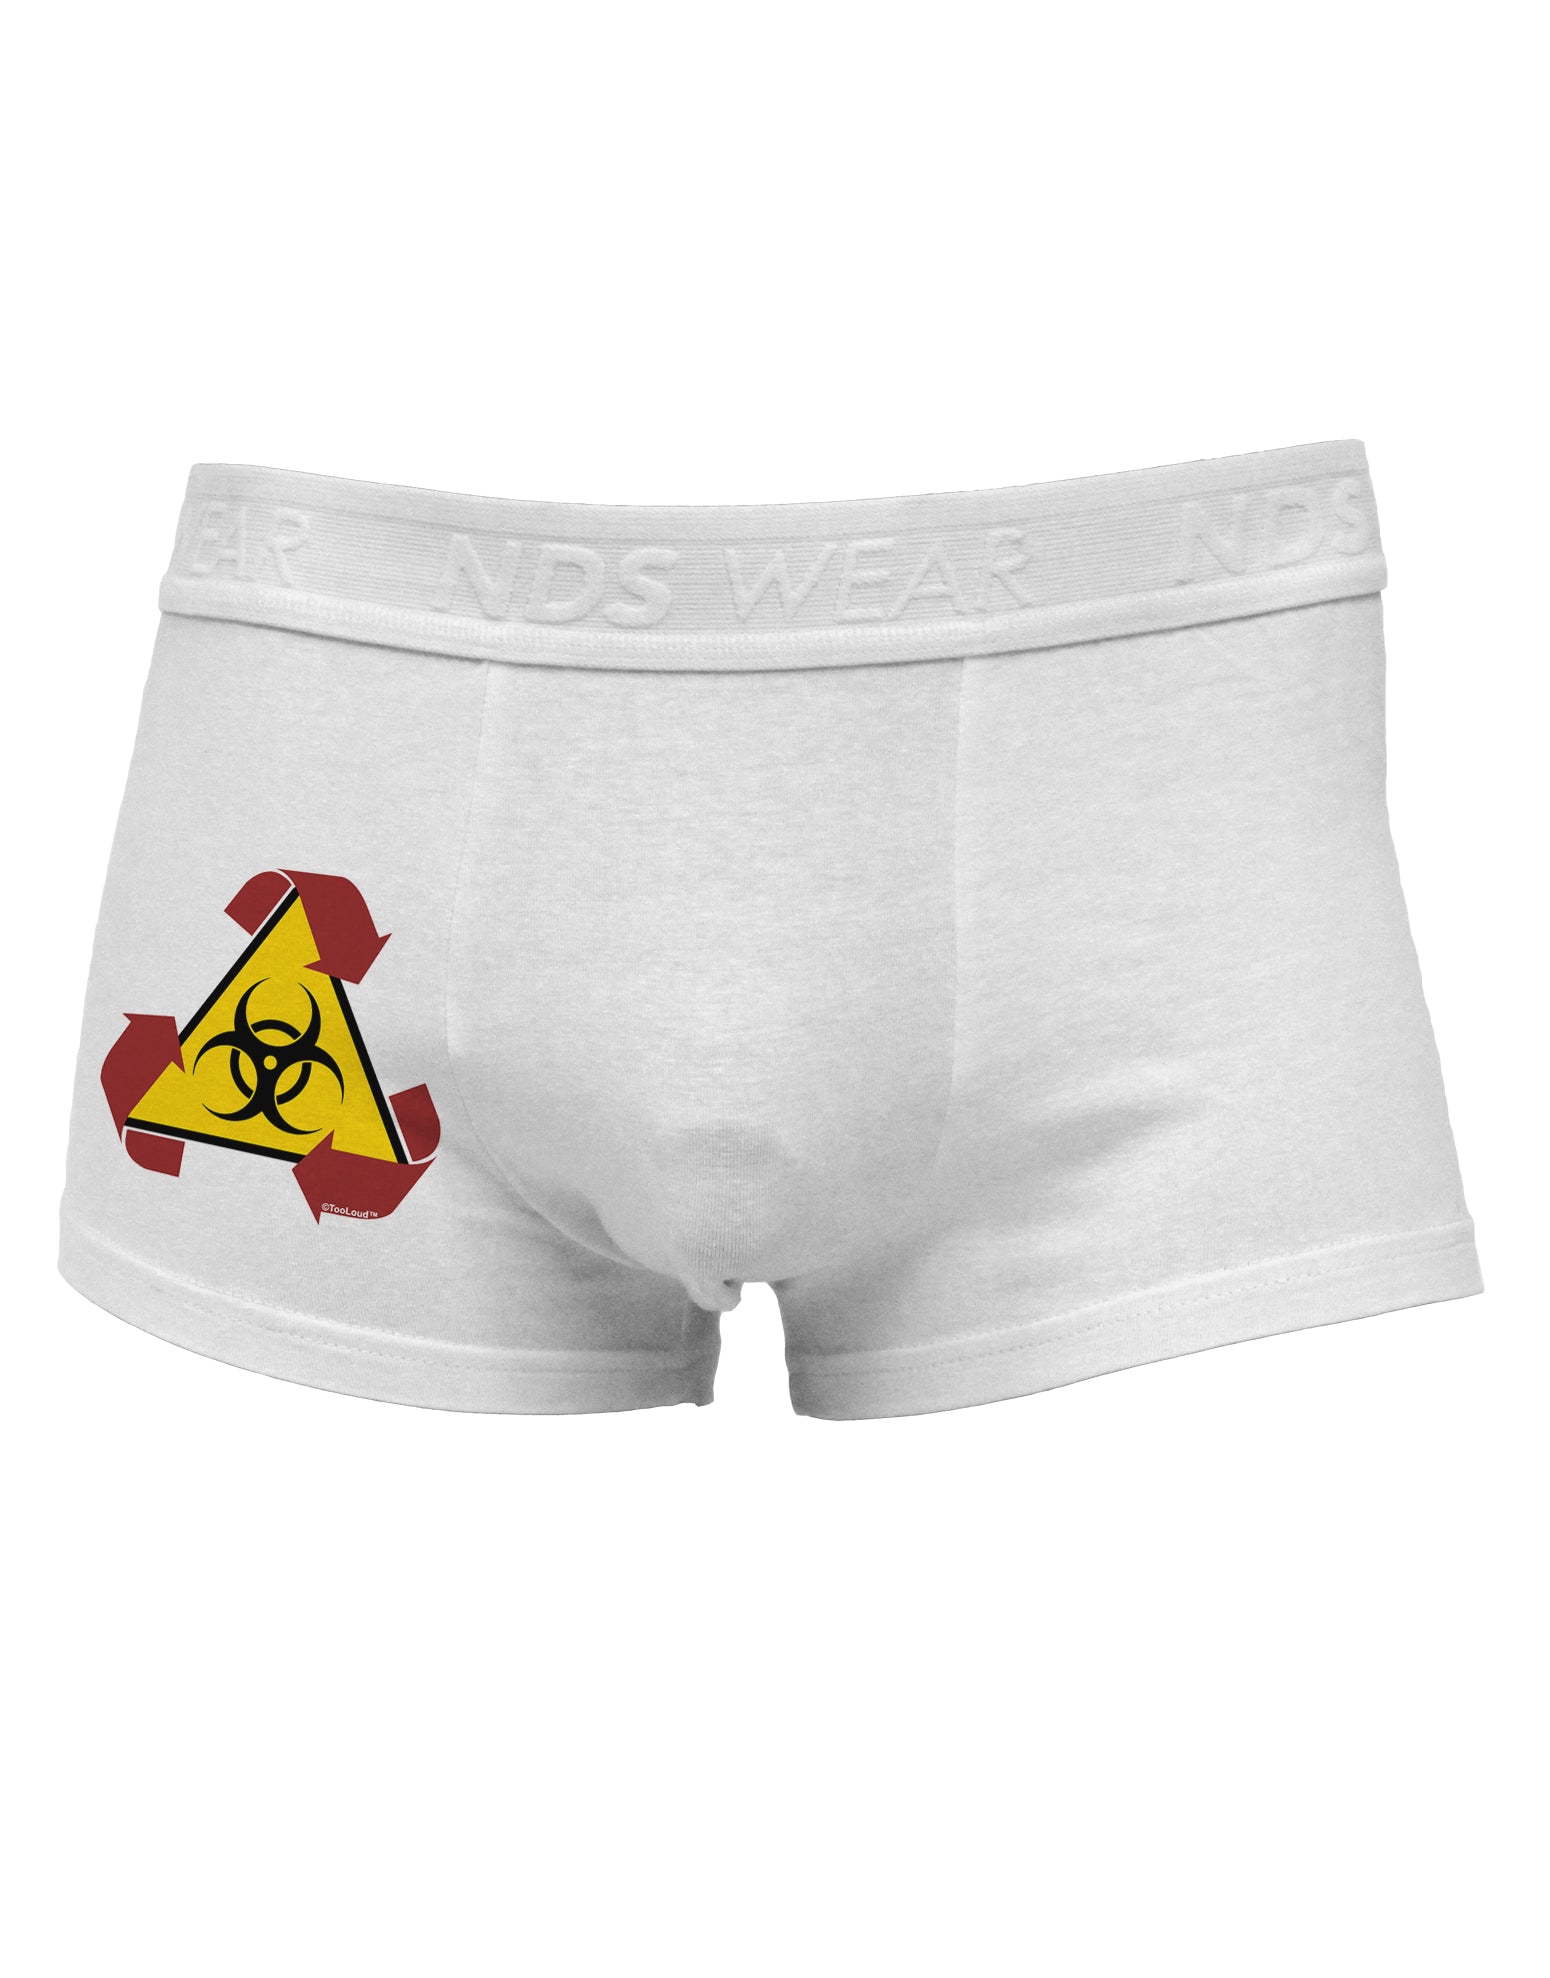 Recycle Biohazard Sign Side Printed Mens Trunk Underwear by